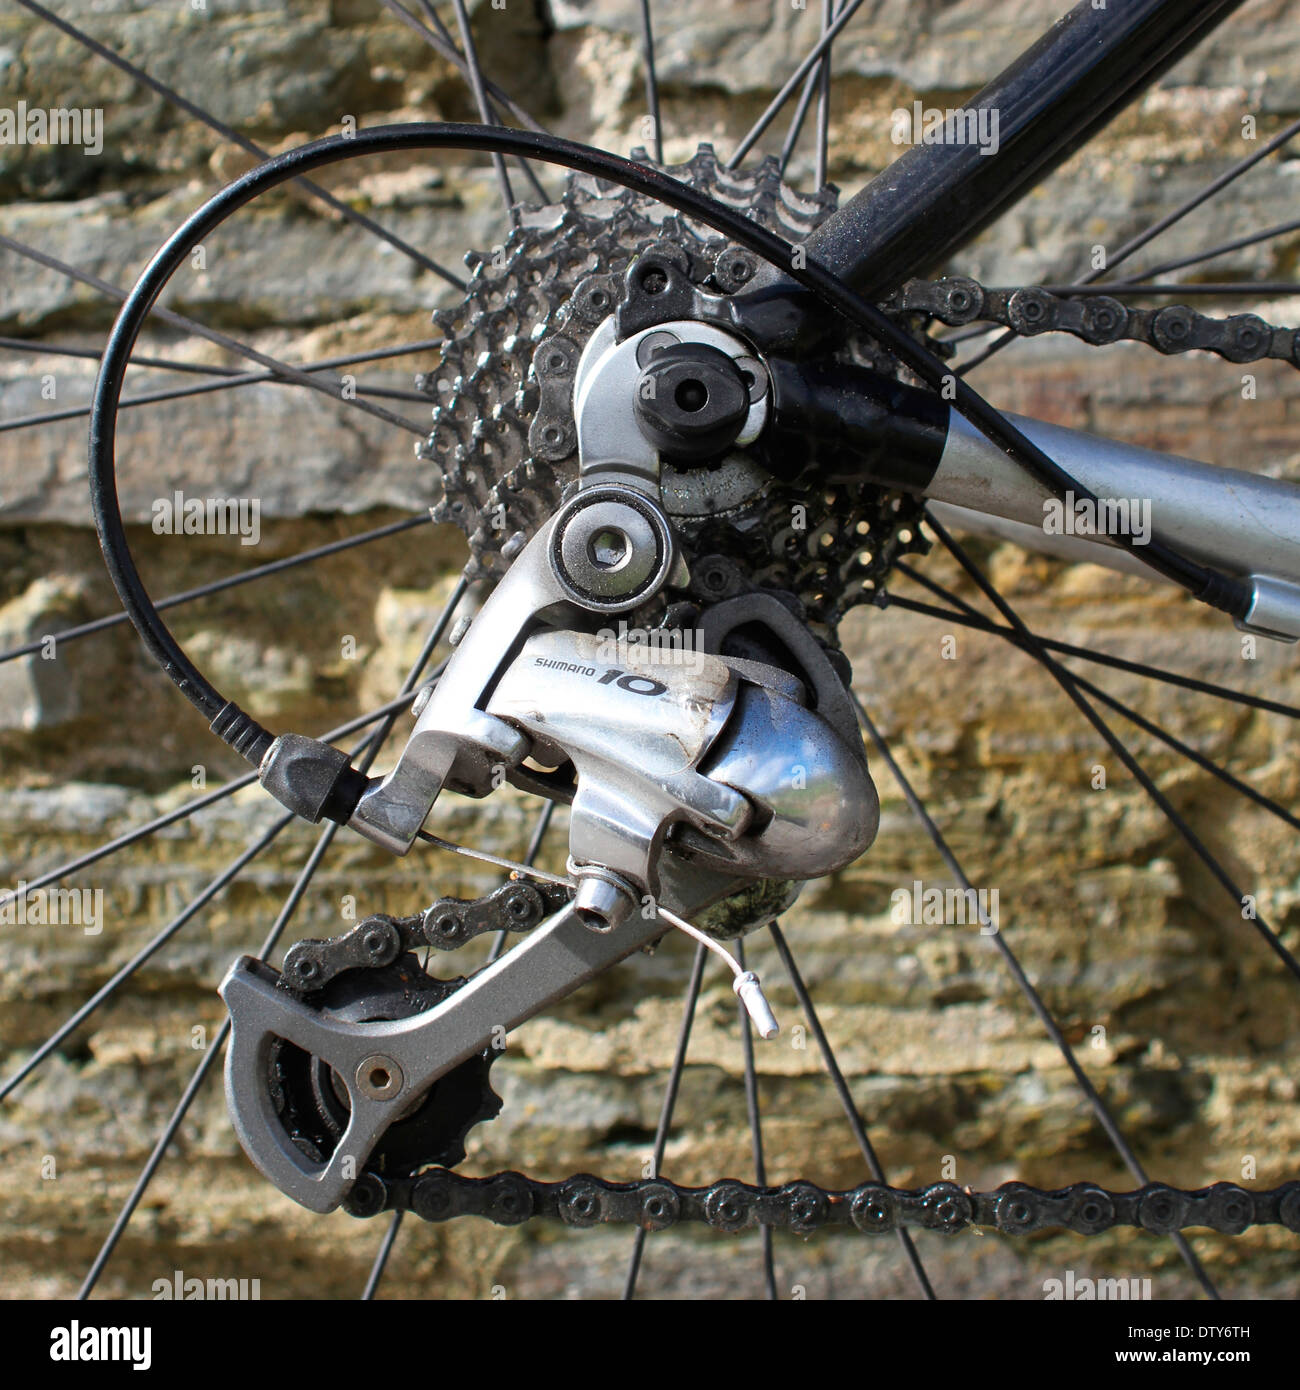 Rear derailleur on bicycle Stock Photo